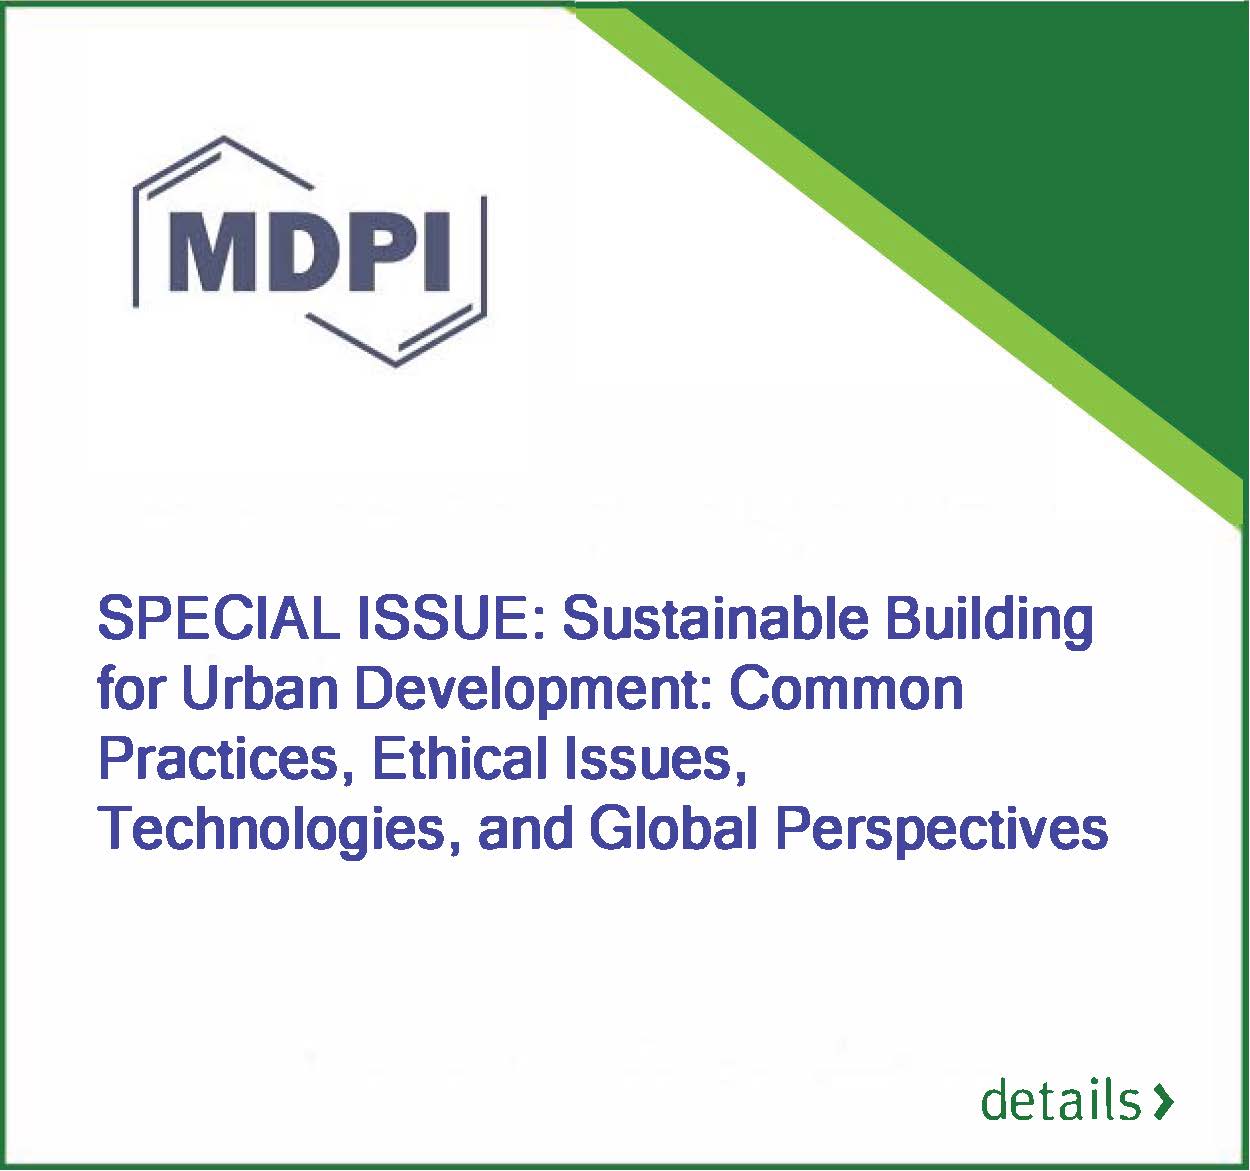 Sustainable Building for Urban Development: Common Practices, Ethical Issues, Technologies, and Global Perspectives